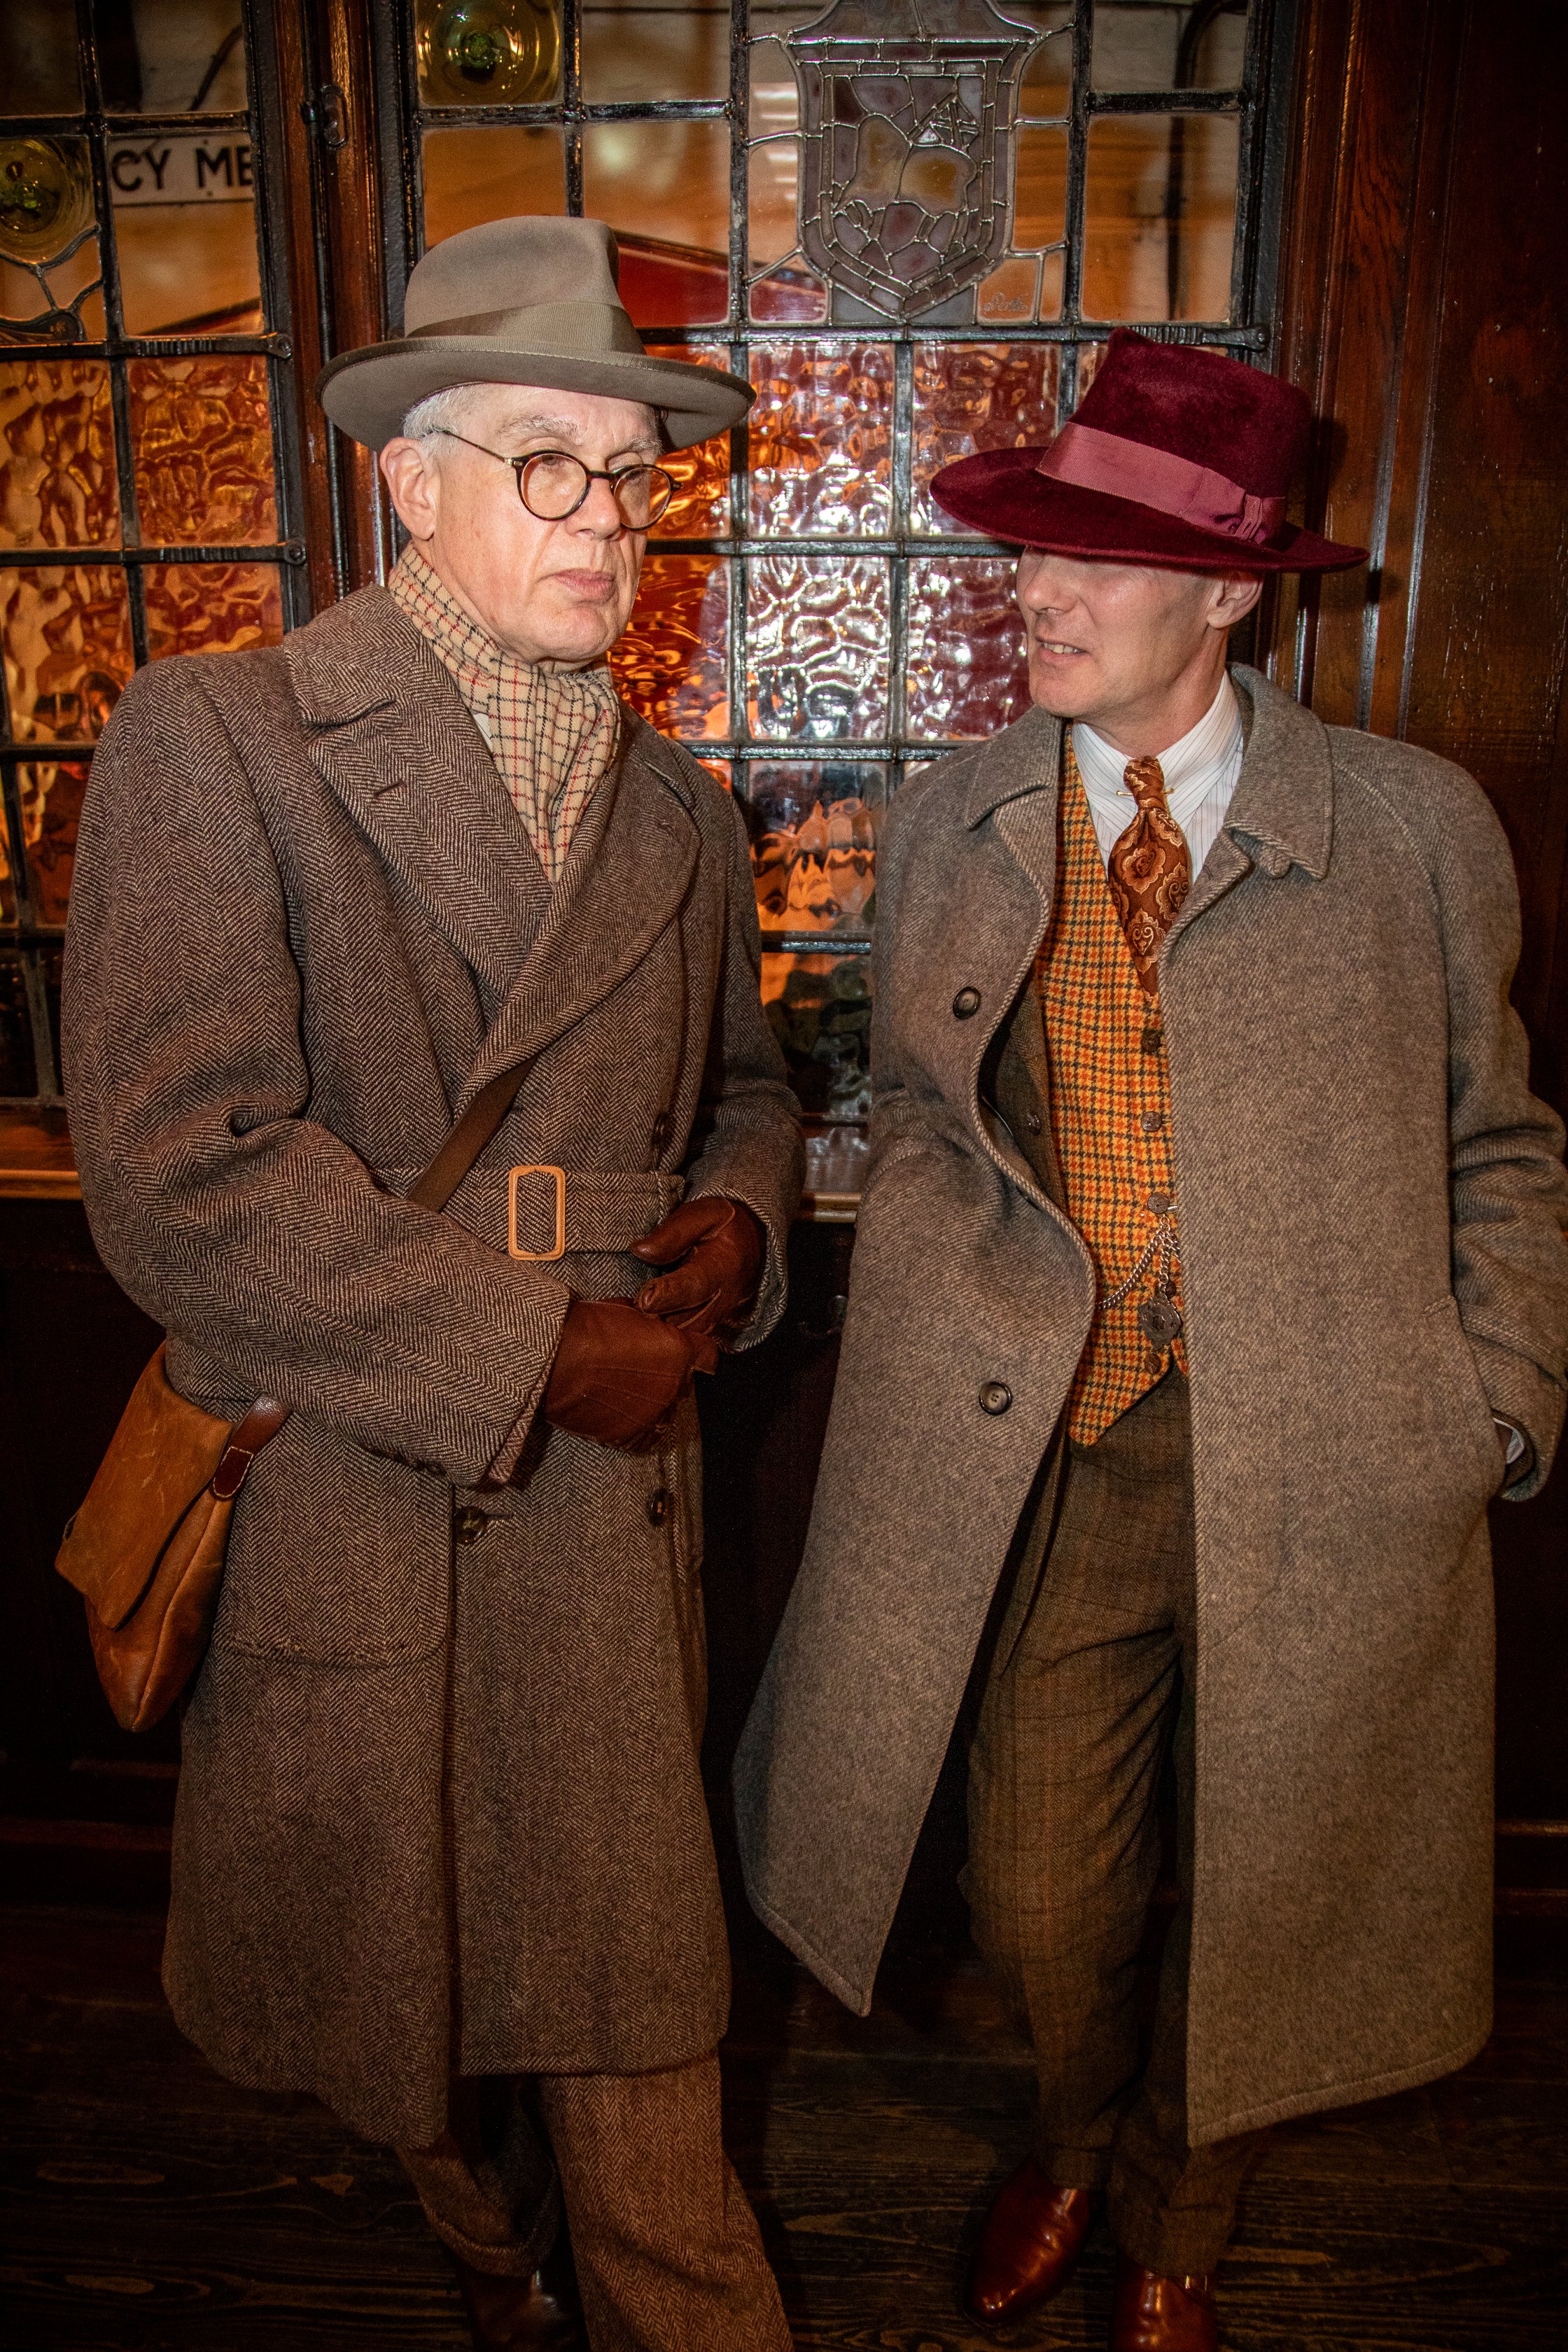 Andrew Swatland and Francis Giordanella, visions in tweed